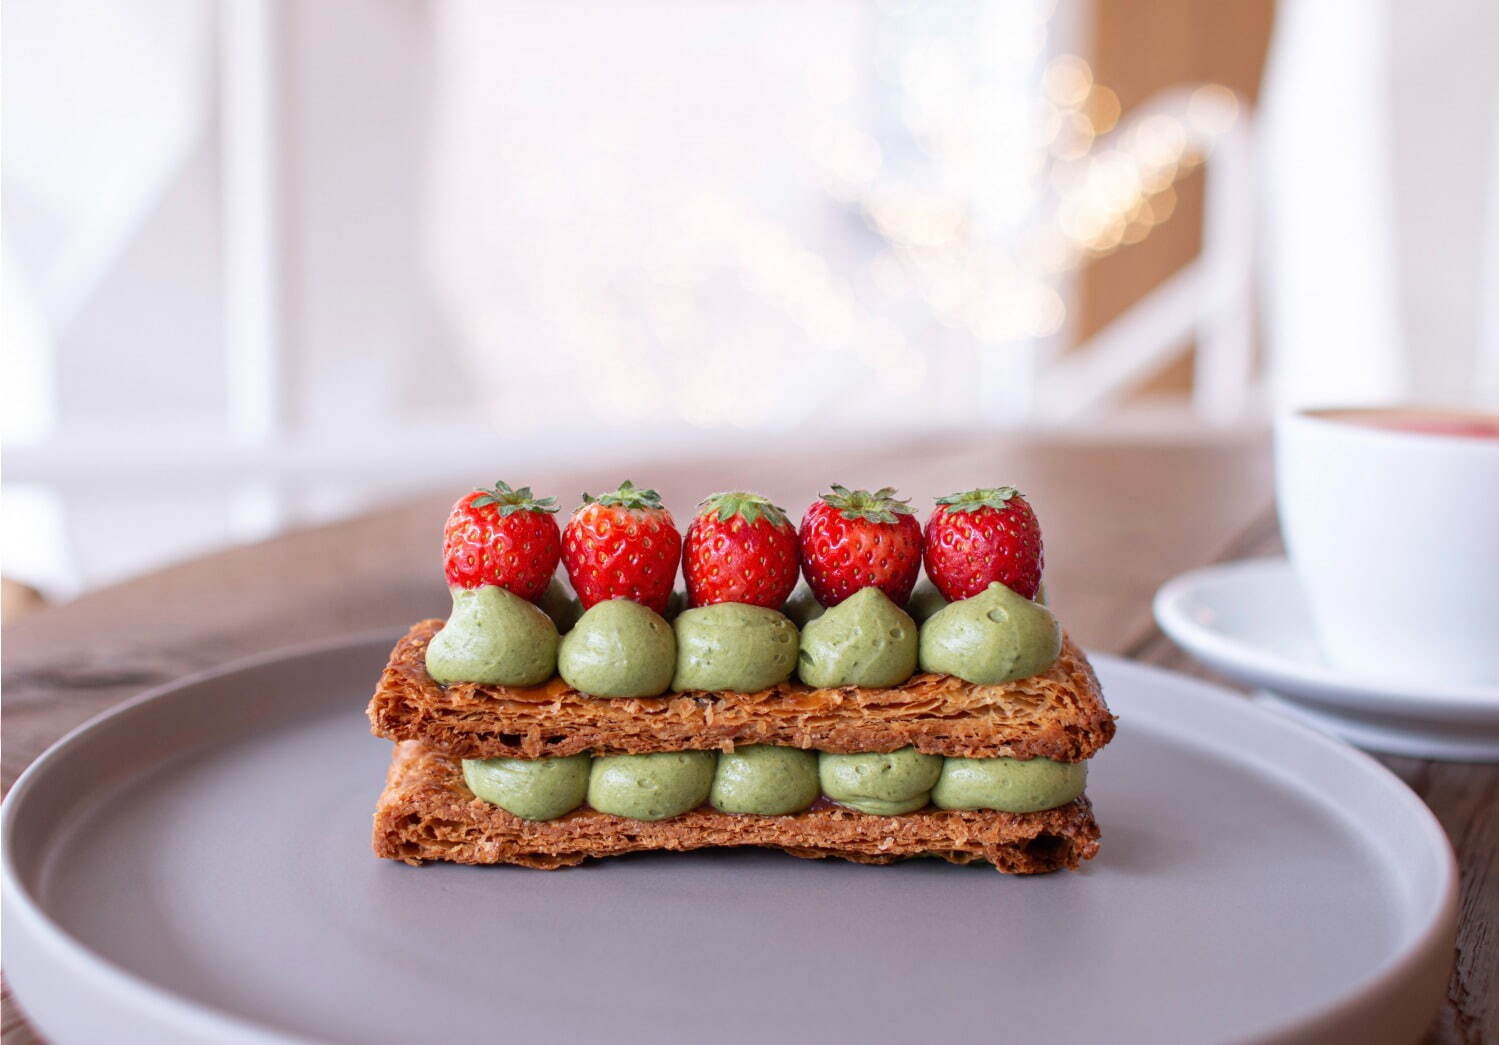 Strawberry and Matcha millefeuille - TREE by NAKED Yoyogi Park in Tokyo